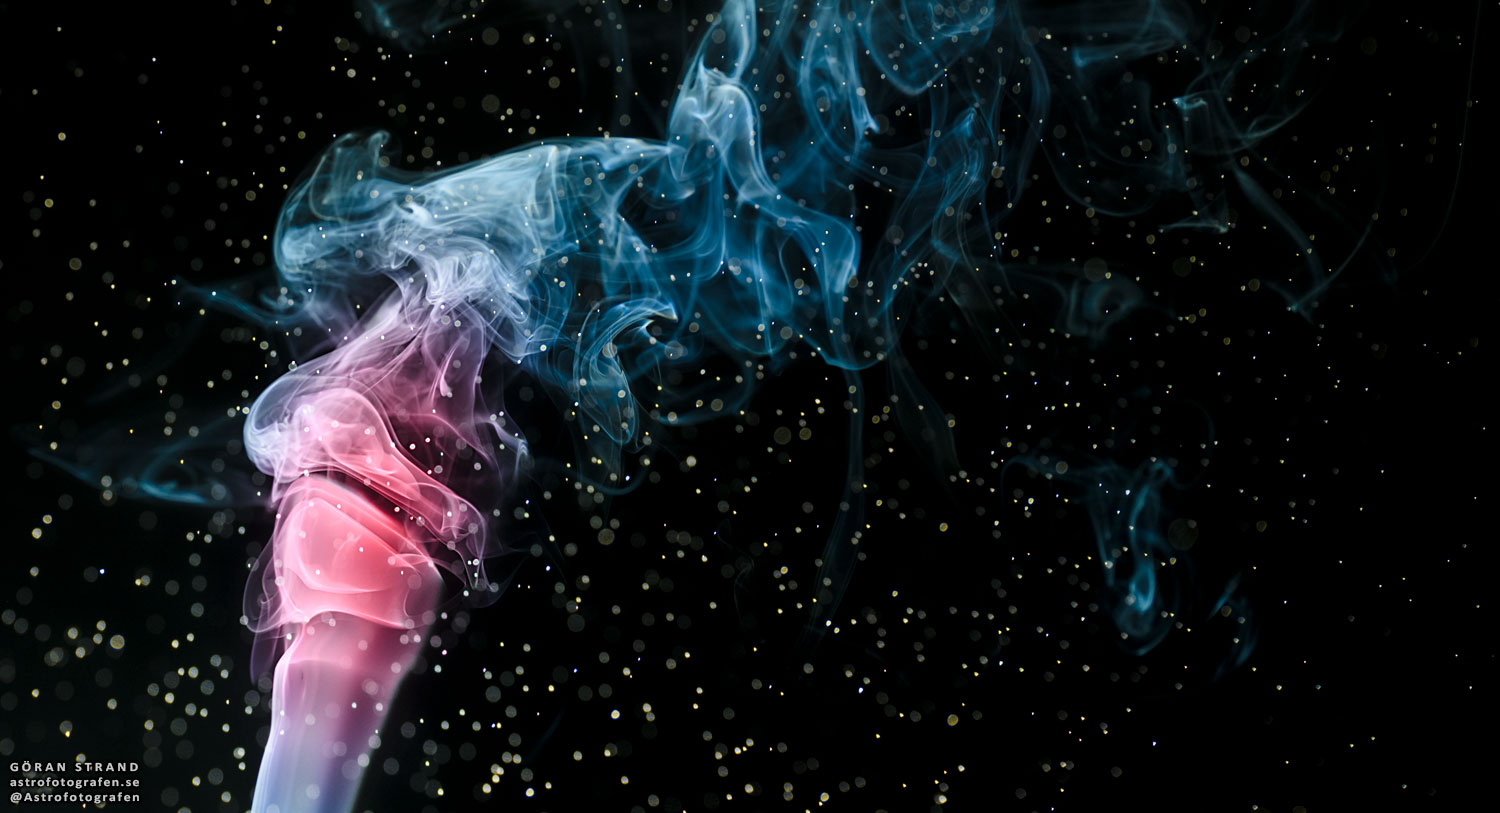 Space art created by smoke and water